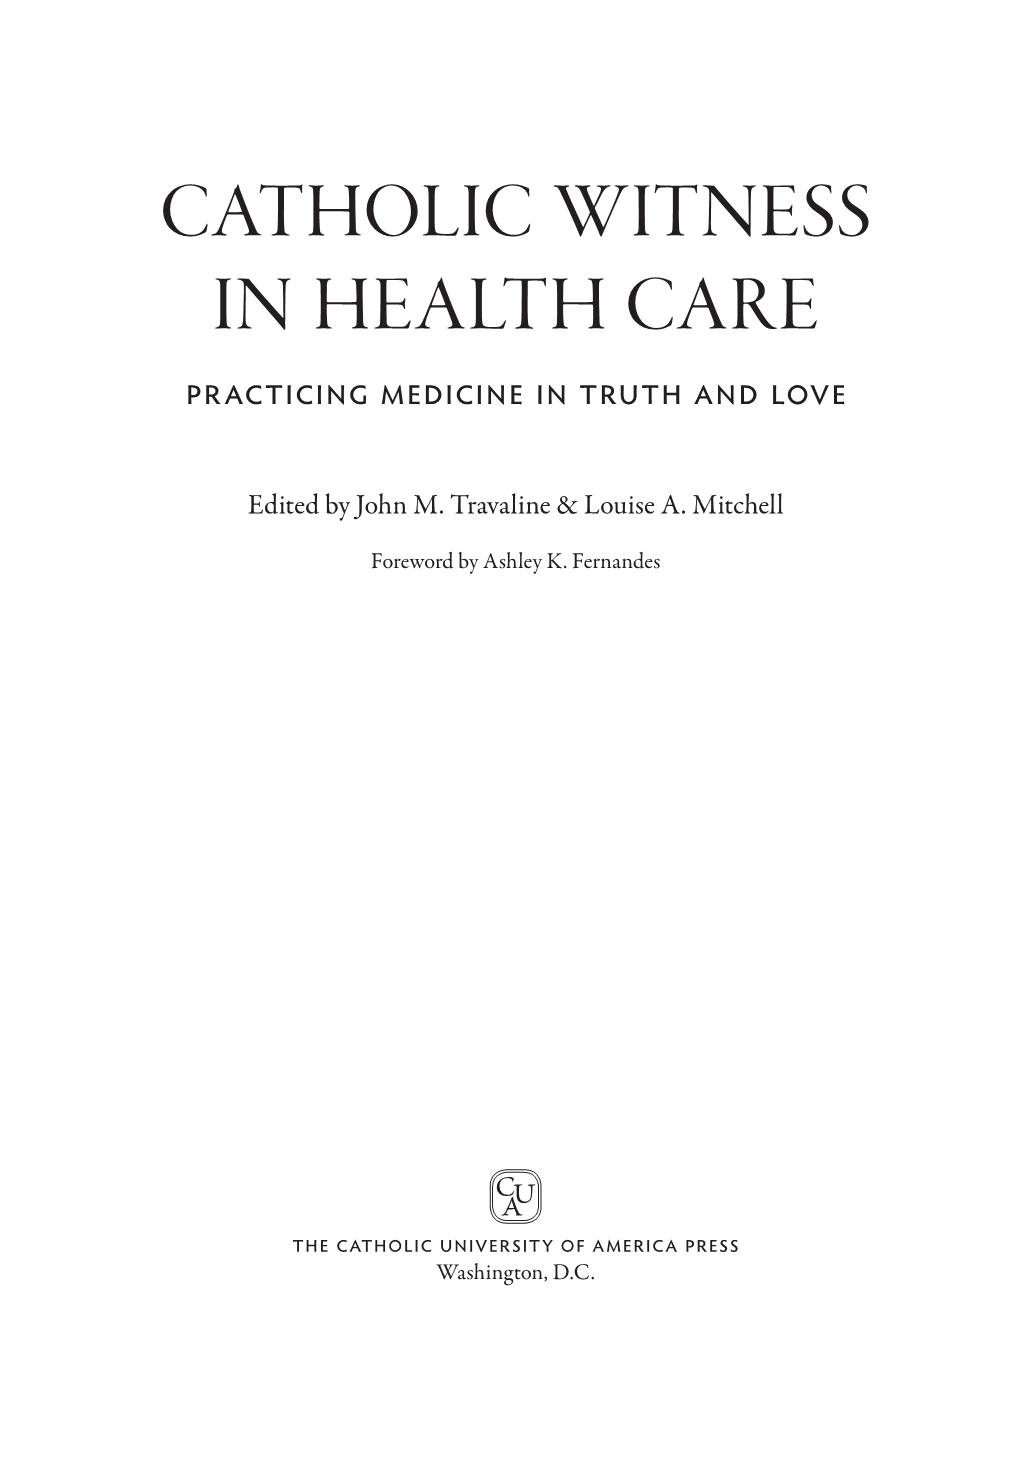 CATHOLIC WITNESS in HEALTH CARE Practicing Medicine in Truth and Love